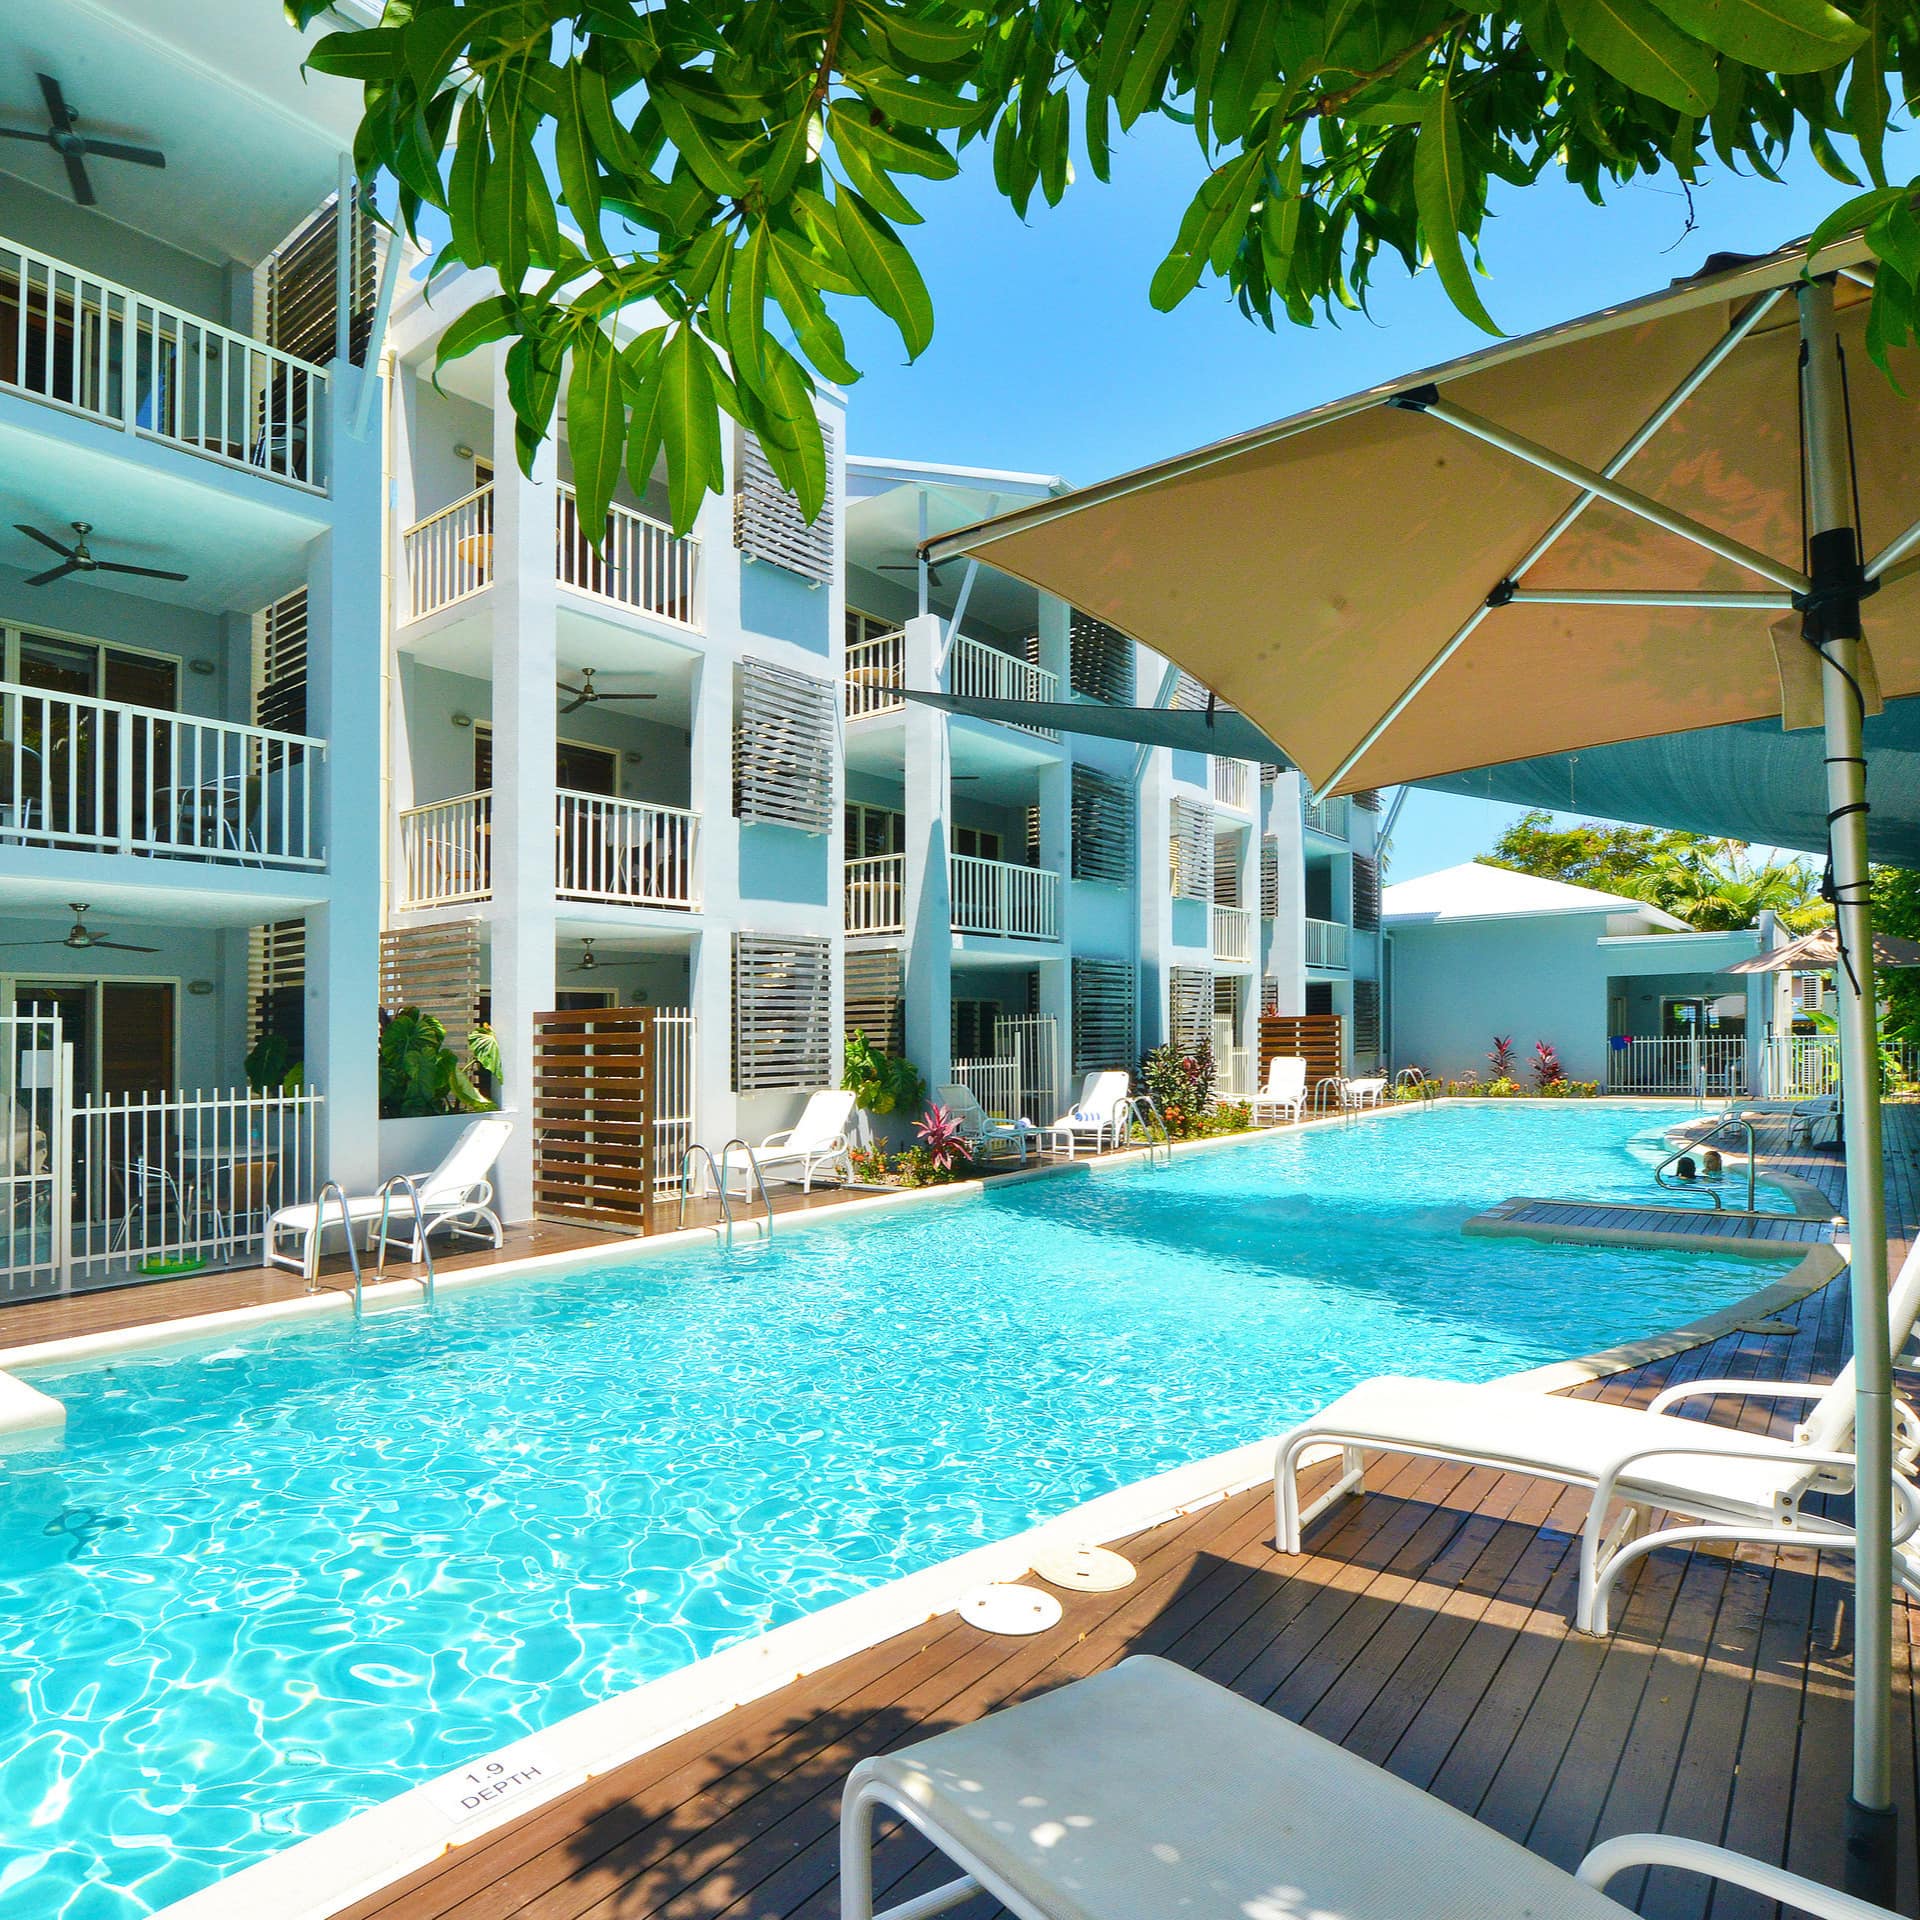 A long pool extends along the side of an apartment complex with balconies on each level, lounge chairs on wood patio space.